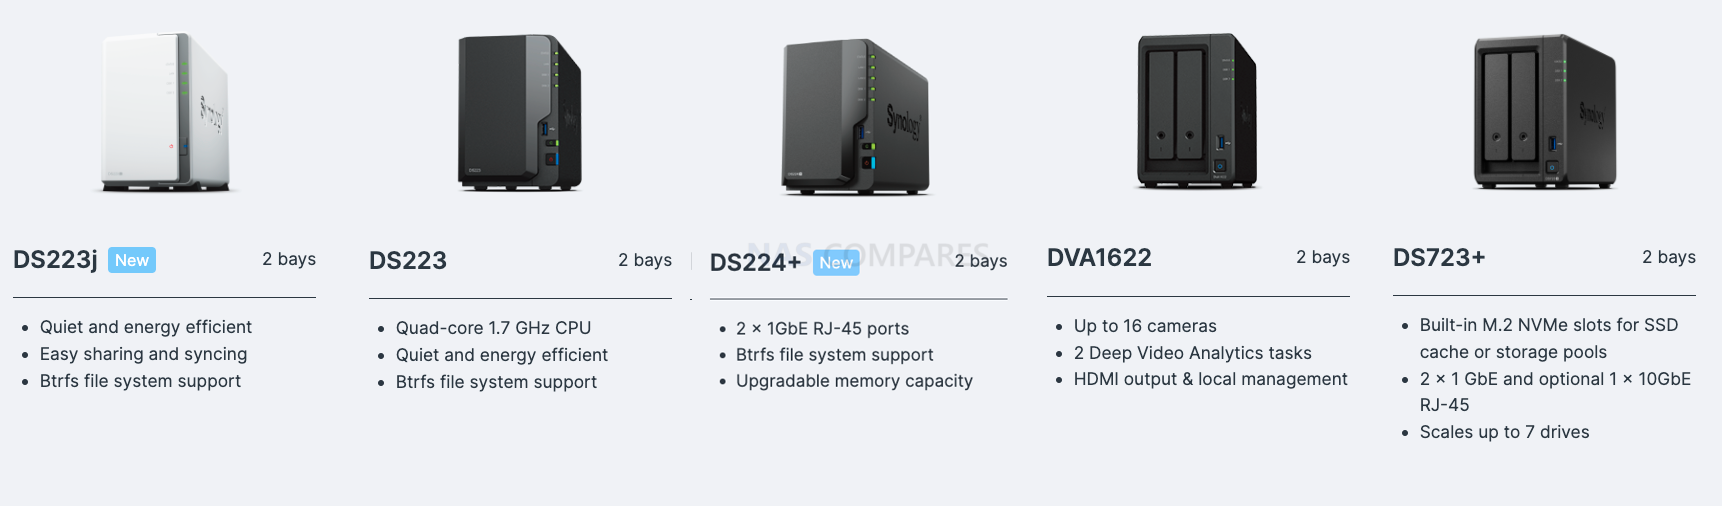 Synology 2-bay NAS range compared (DS223j, DS223, DS224+, DVA1622